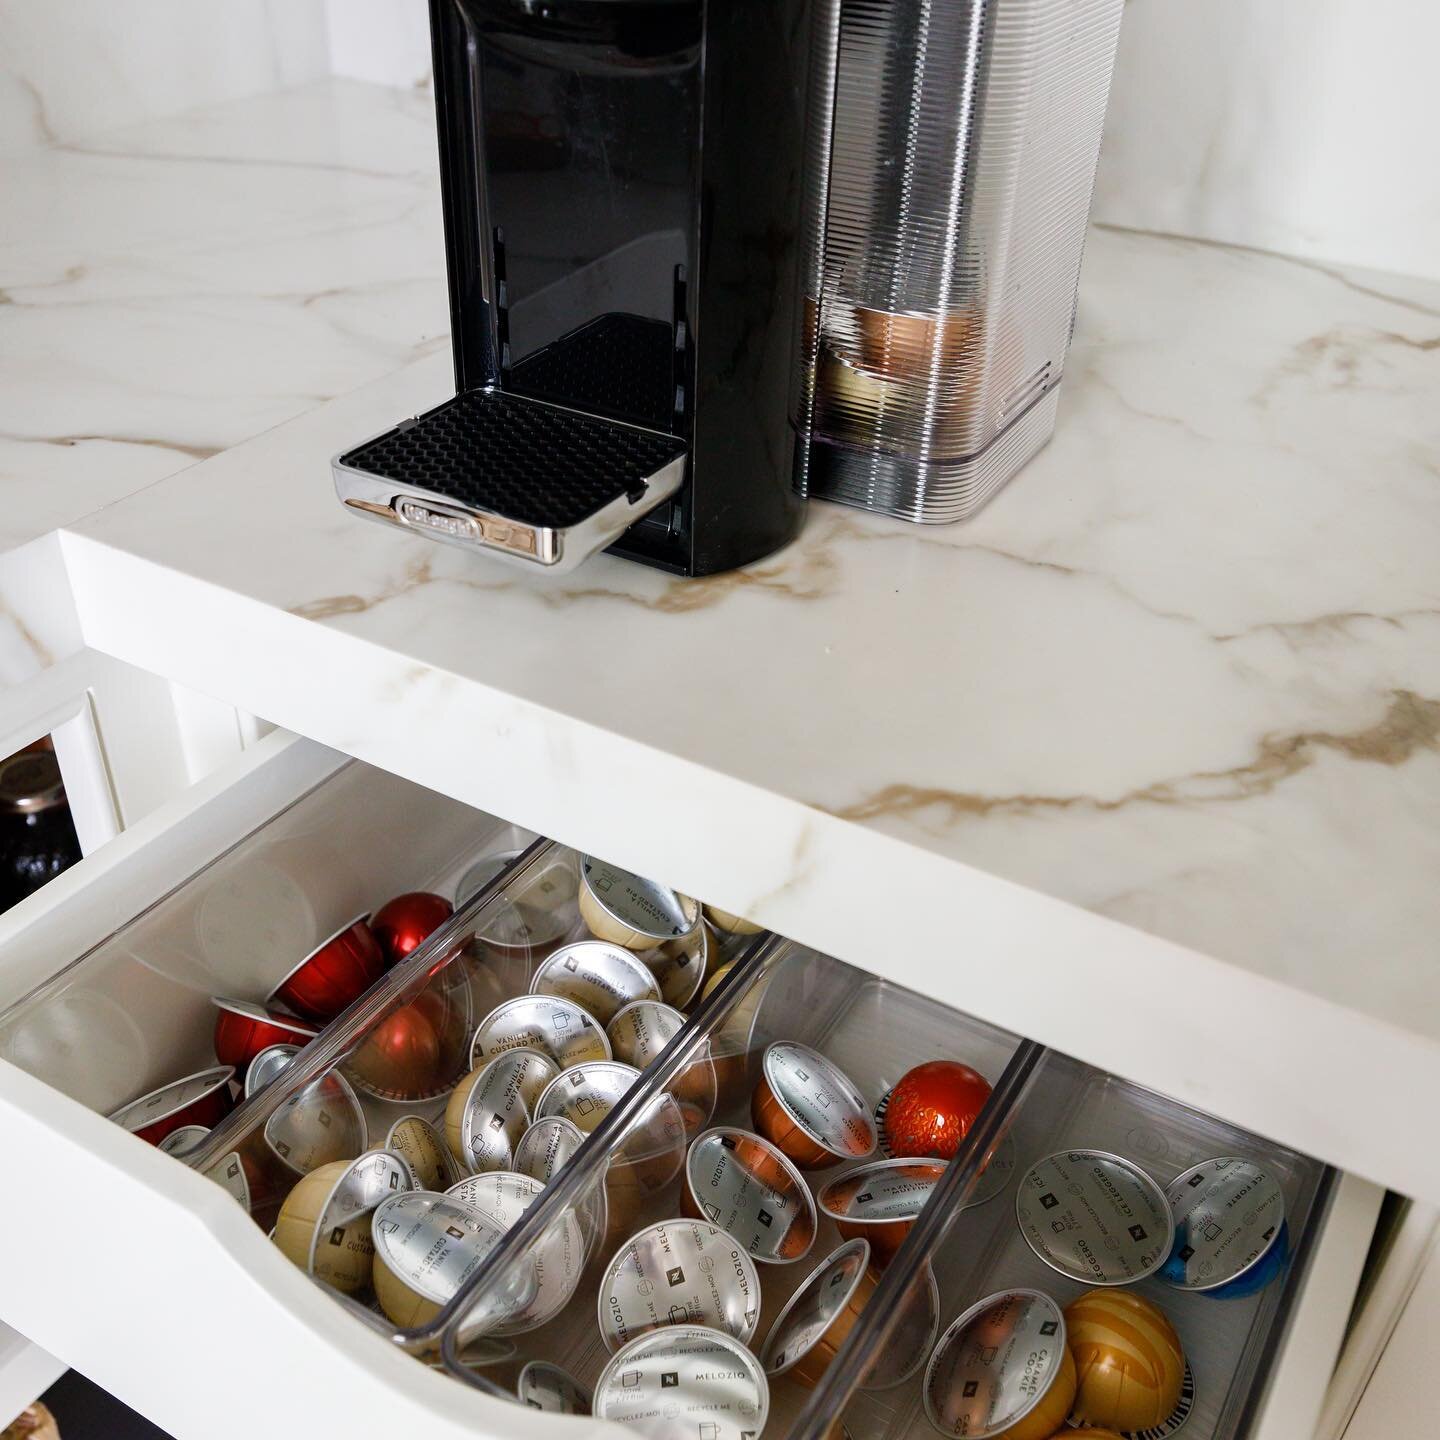 it might be a short week, but we still need alll the caffeine, please 😄☕️

#coffeestation #organizedpantry #pantrygoals #morecoffeeplease #morecoffee #coffeetime #organizedkitchen #kitchenorganization #professionalorganizer #caffeinedaily #coffeesho